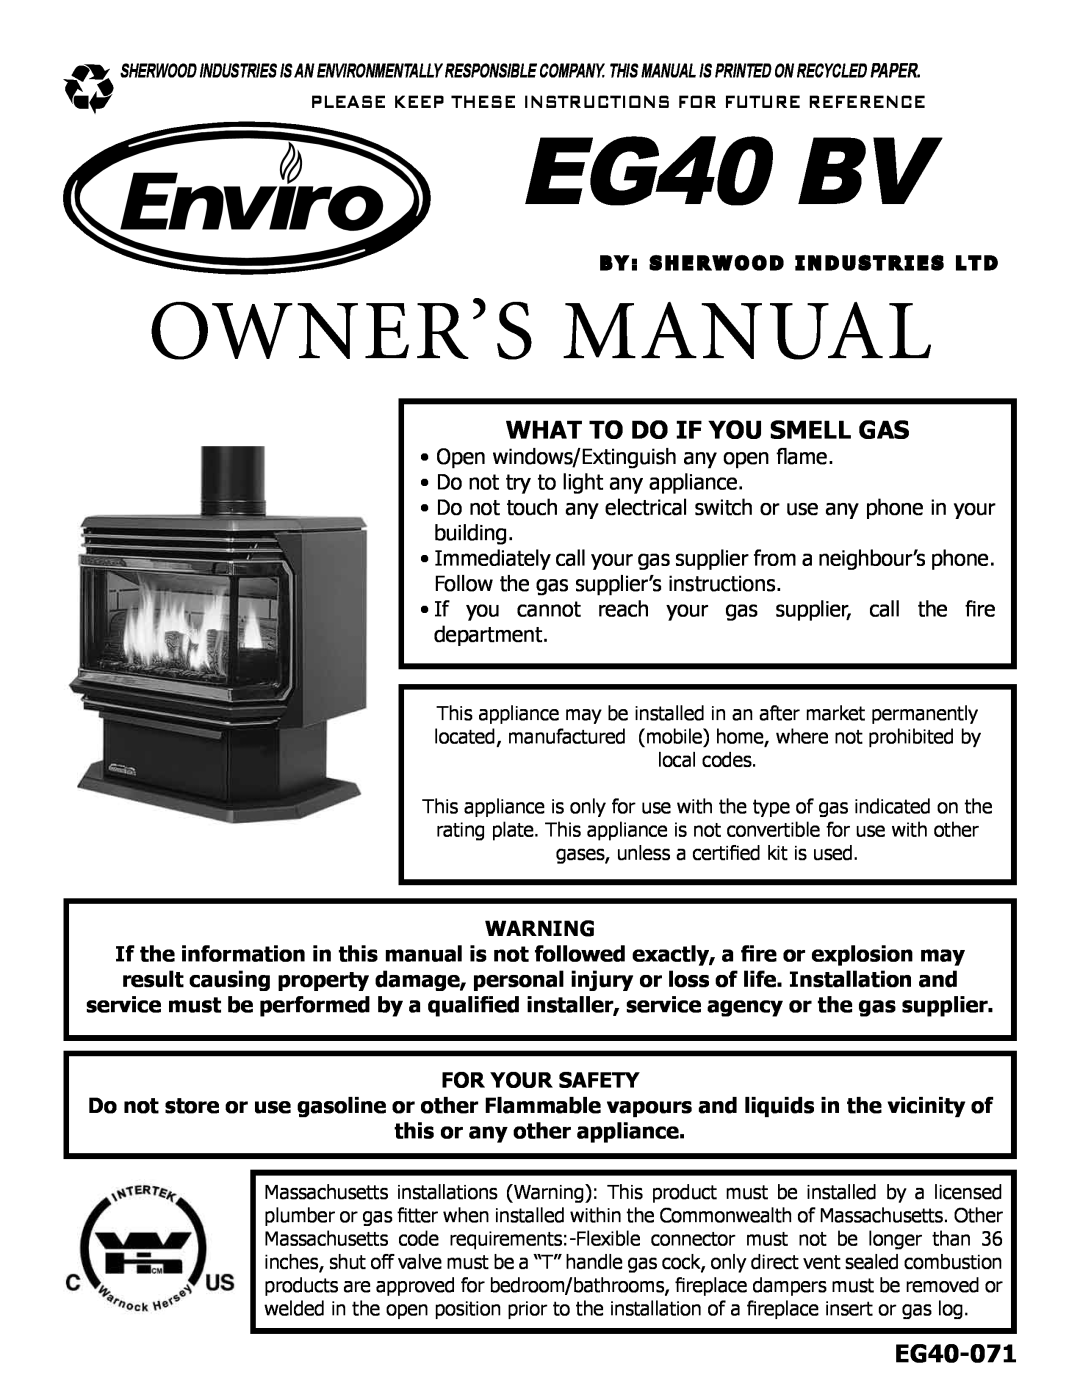 Enviro EG40 BV owner manual For Your Safety, this or any other appliance, What To Do If You Smell Gas, EG40-071 